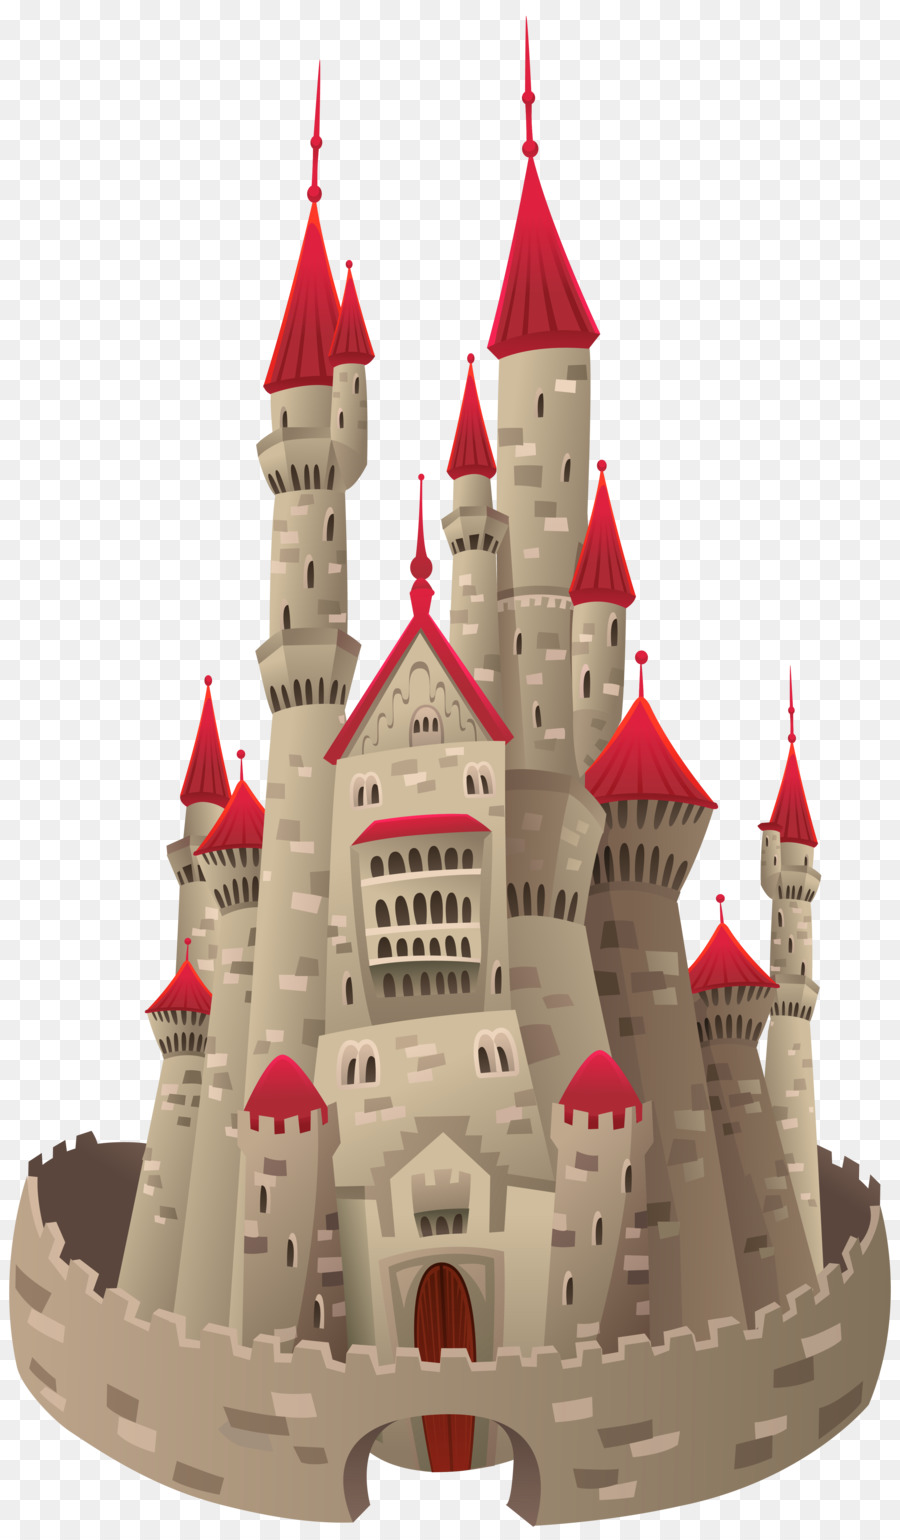 Fairy tale Royalty-free - Castle png download - 3414*5802 - Free Transparent Fairy Tale png Download.